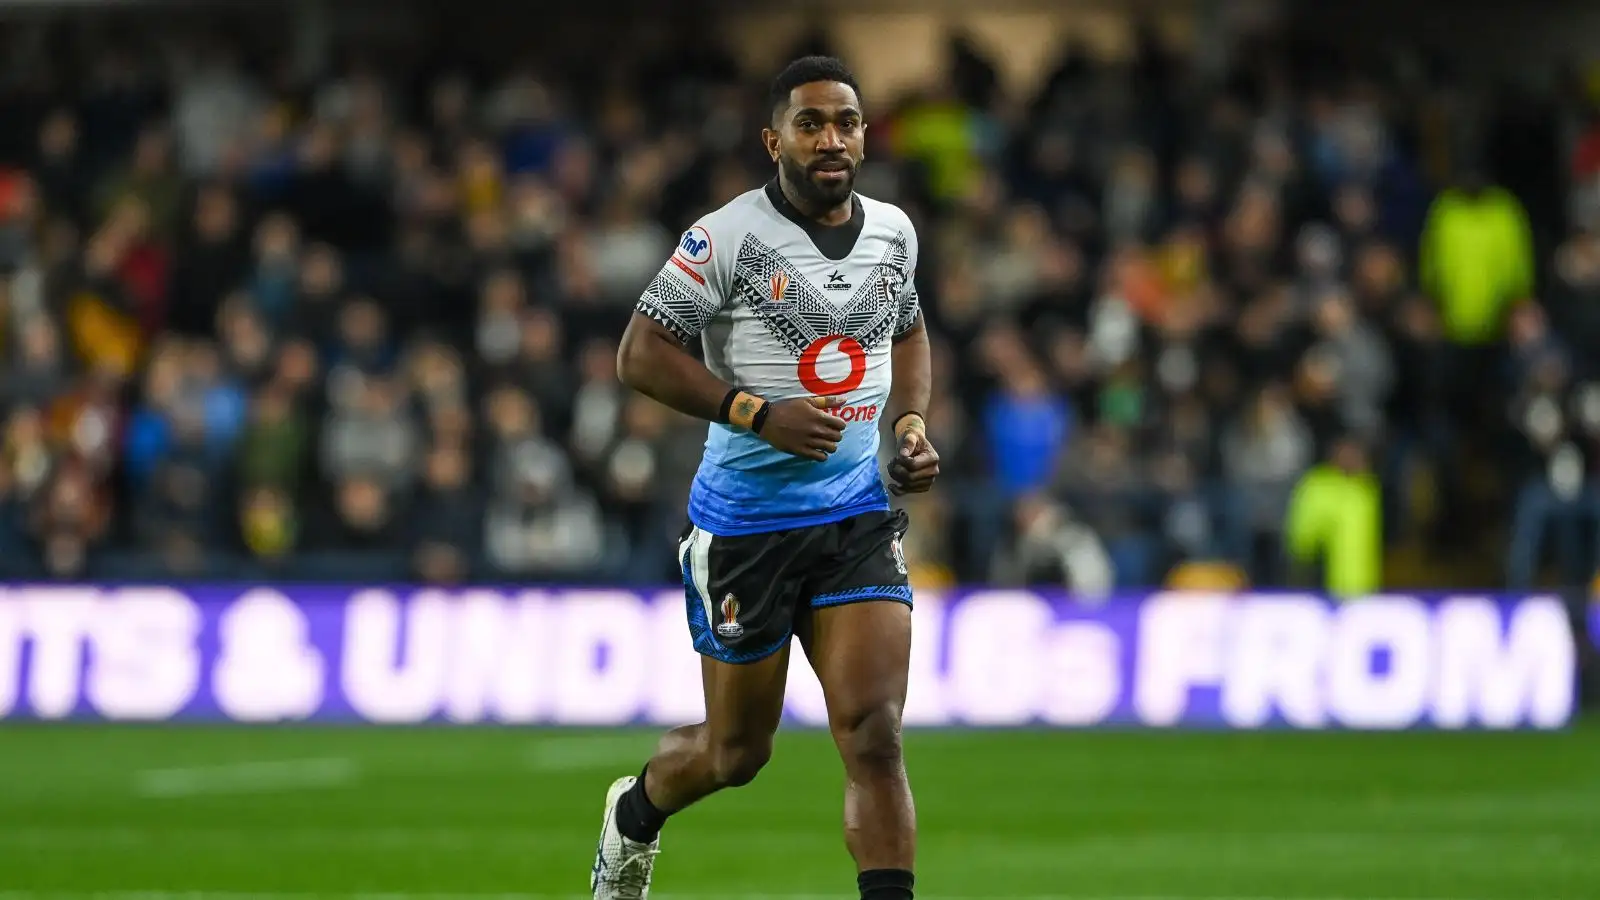 Fiji international signs new Hull FC contract: ‘I’m so grateful for the opportunity’